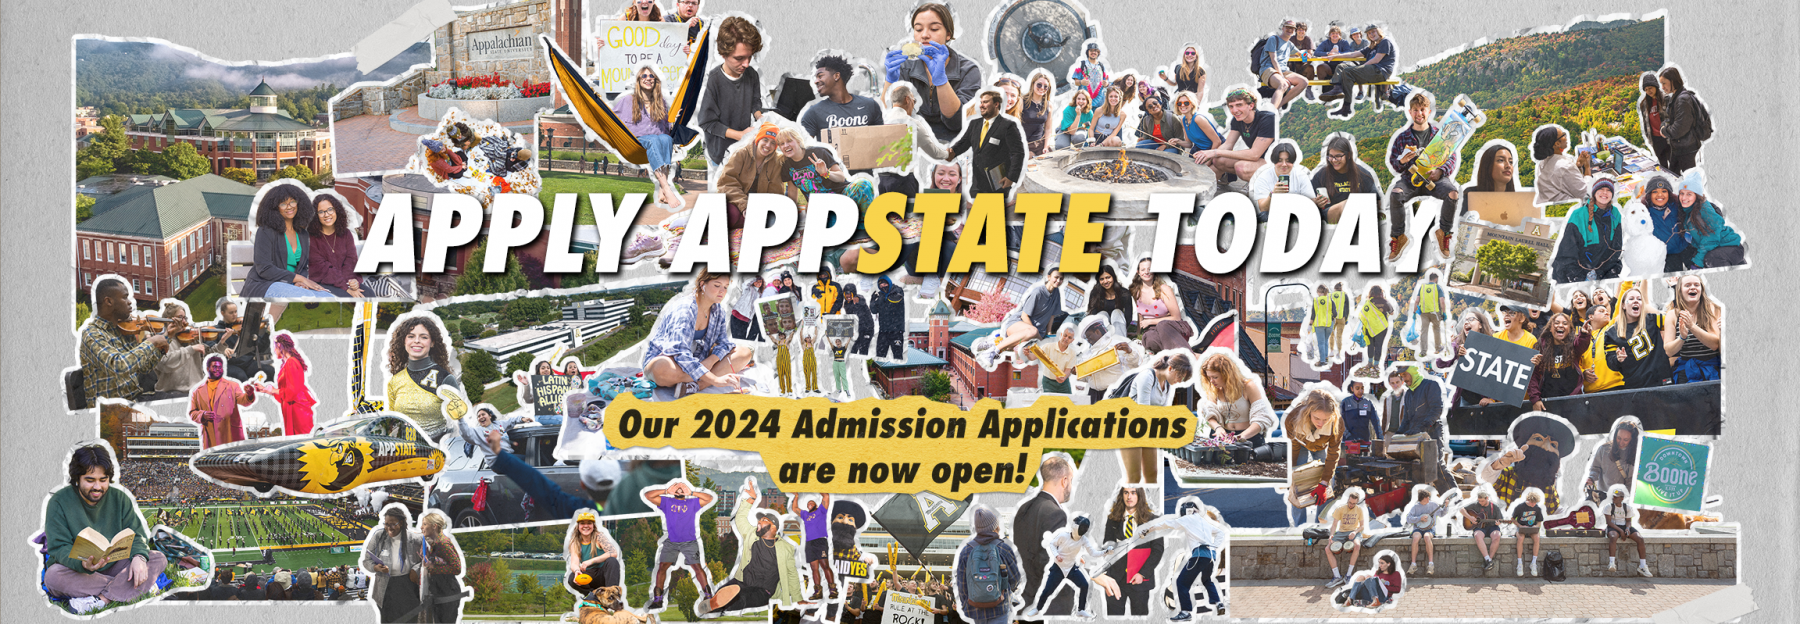 Apply App State today. Our 2024 Admission Applications are now open!